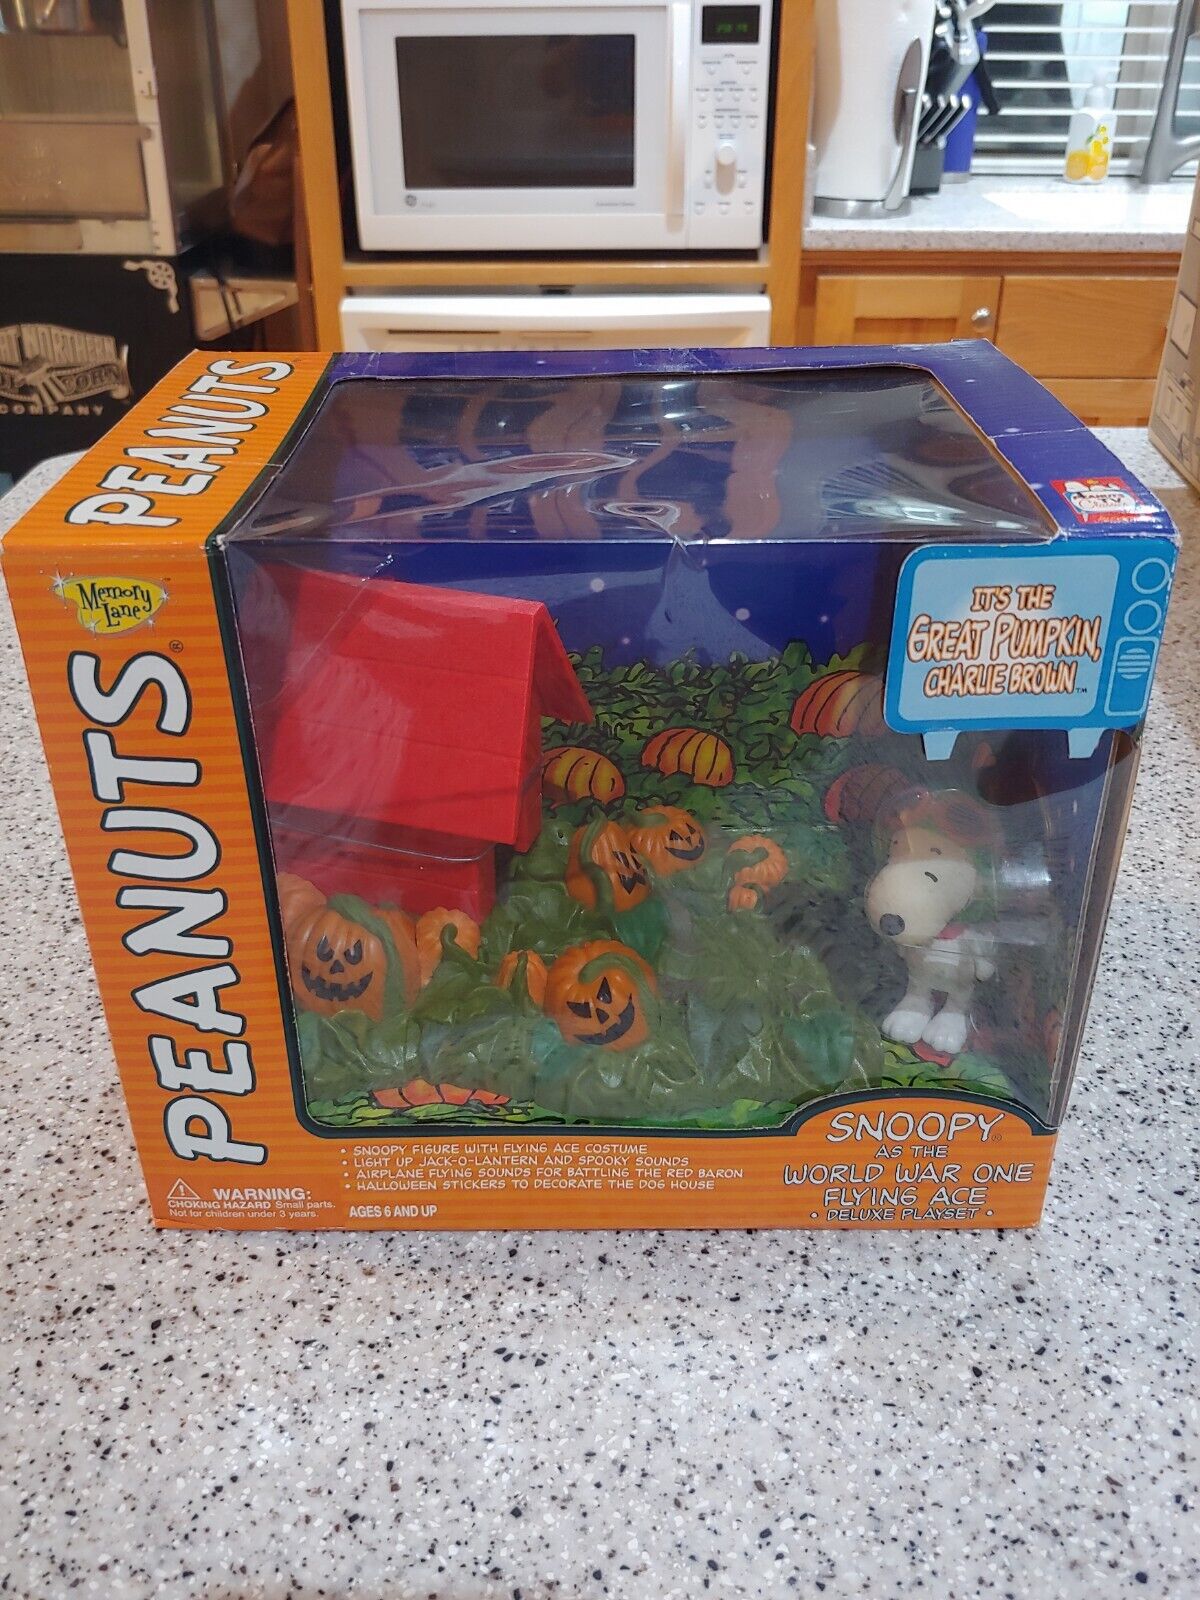 Memory Lane Great Pumpkin Charlie Brown Snoopy World War One Flying Ace (2002)